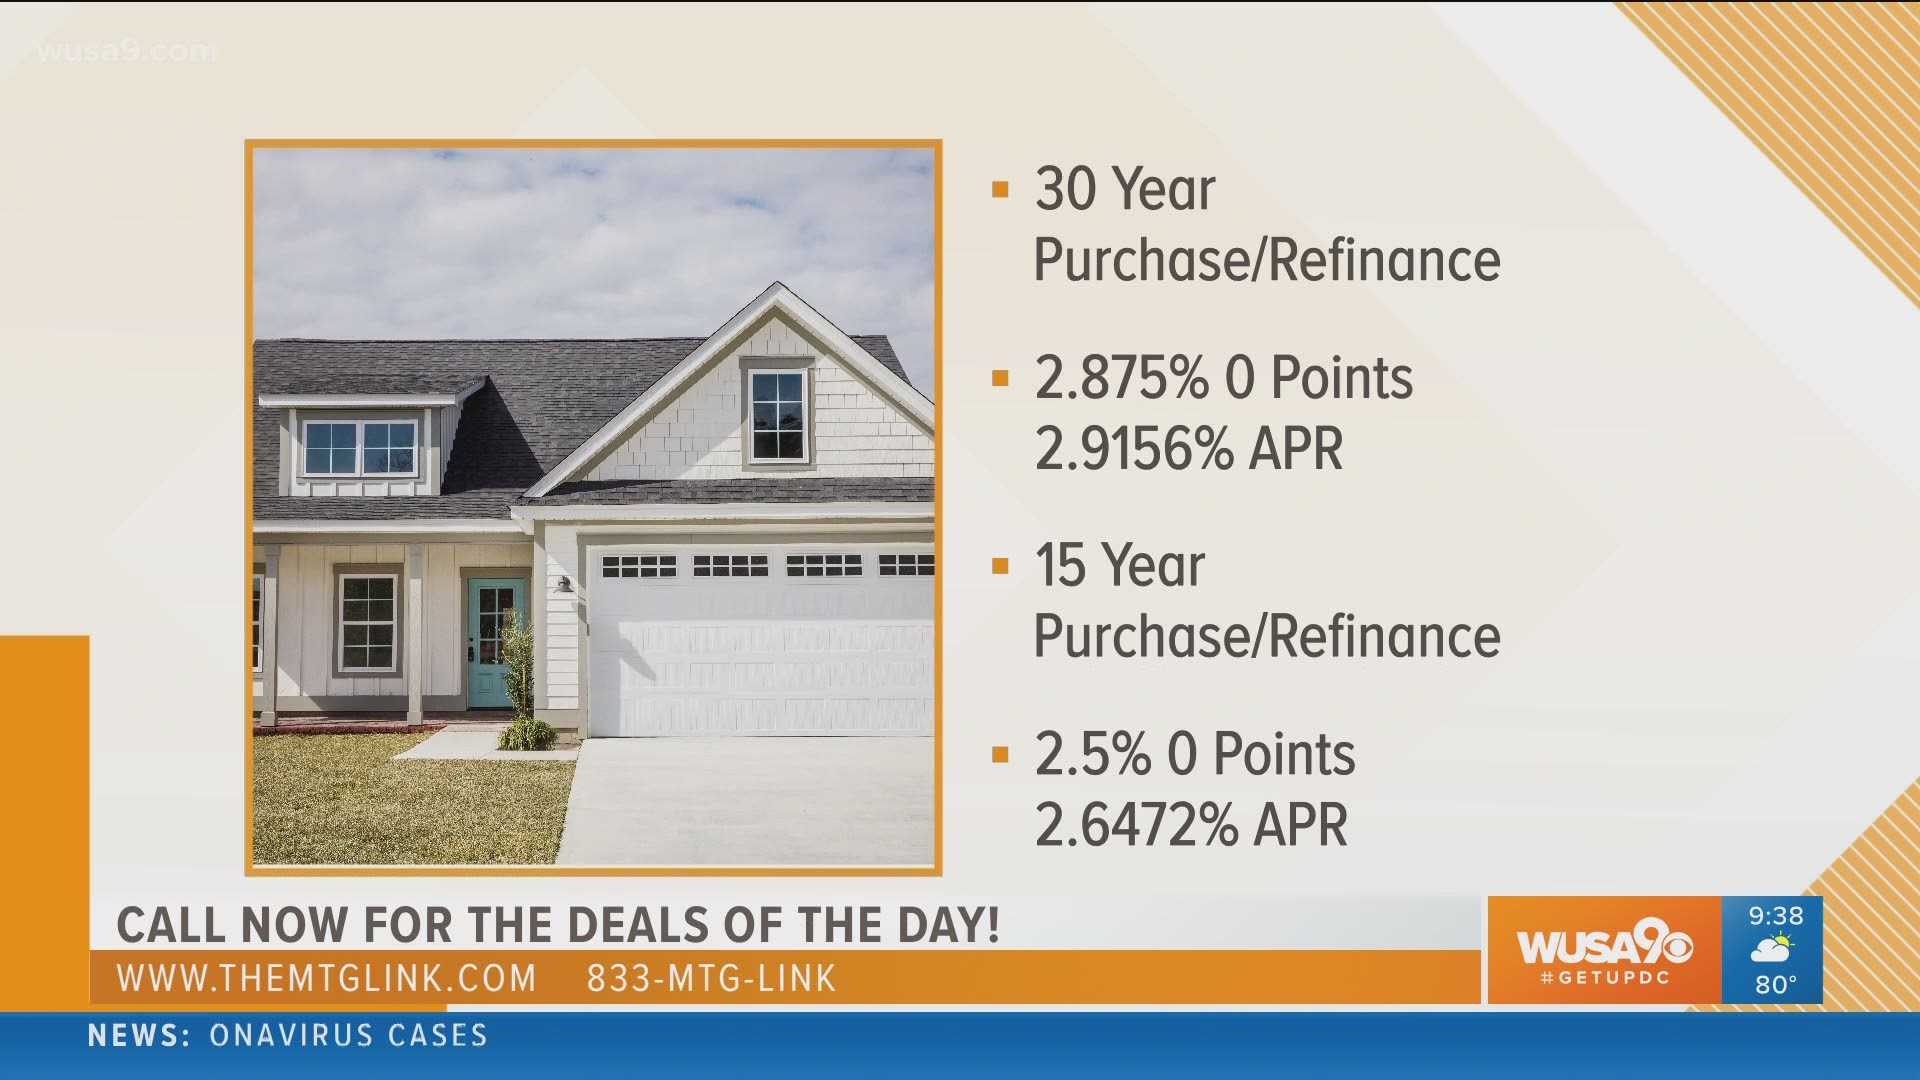 This segment is sponsored by the Real Estate Top Performers. Visit www.themtglink.com or call 833-MTG-LINK.